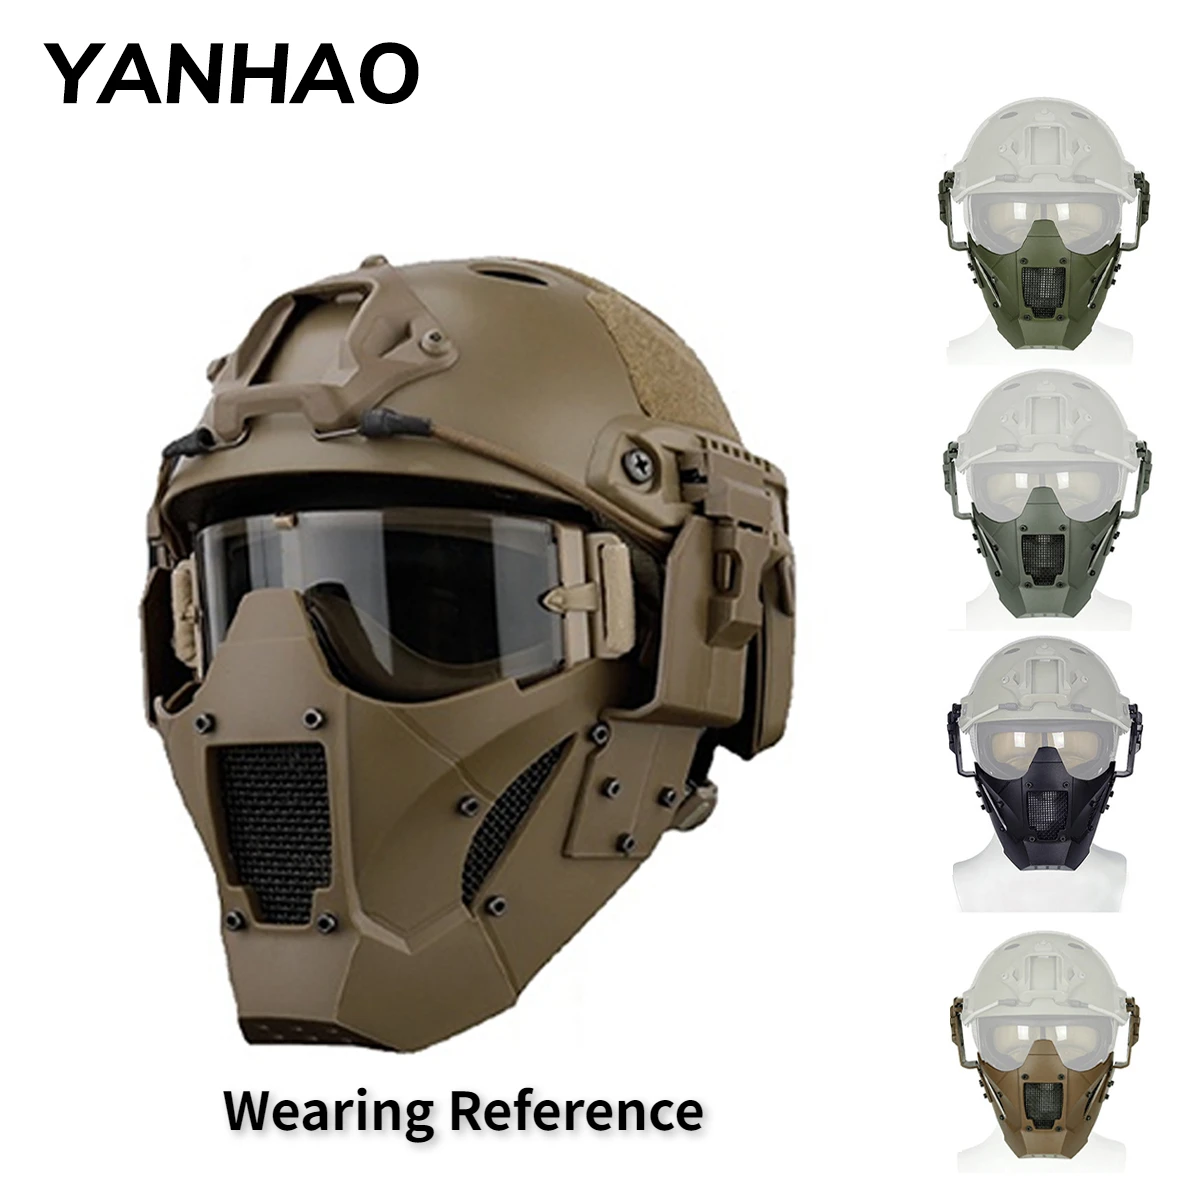 

Quality Iron Warrior Tactical Mask (Half Face) Solid Helmet Cover Accessories for Men Outdoor Paintball Army Airsoft Folding